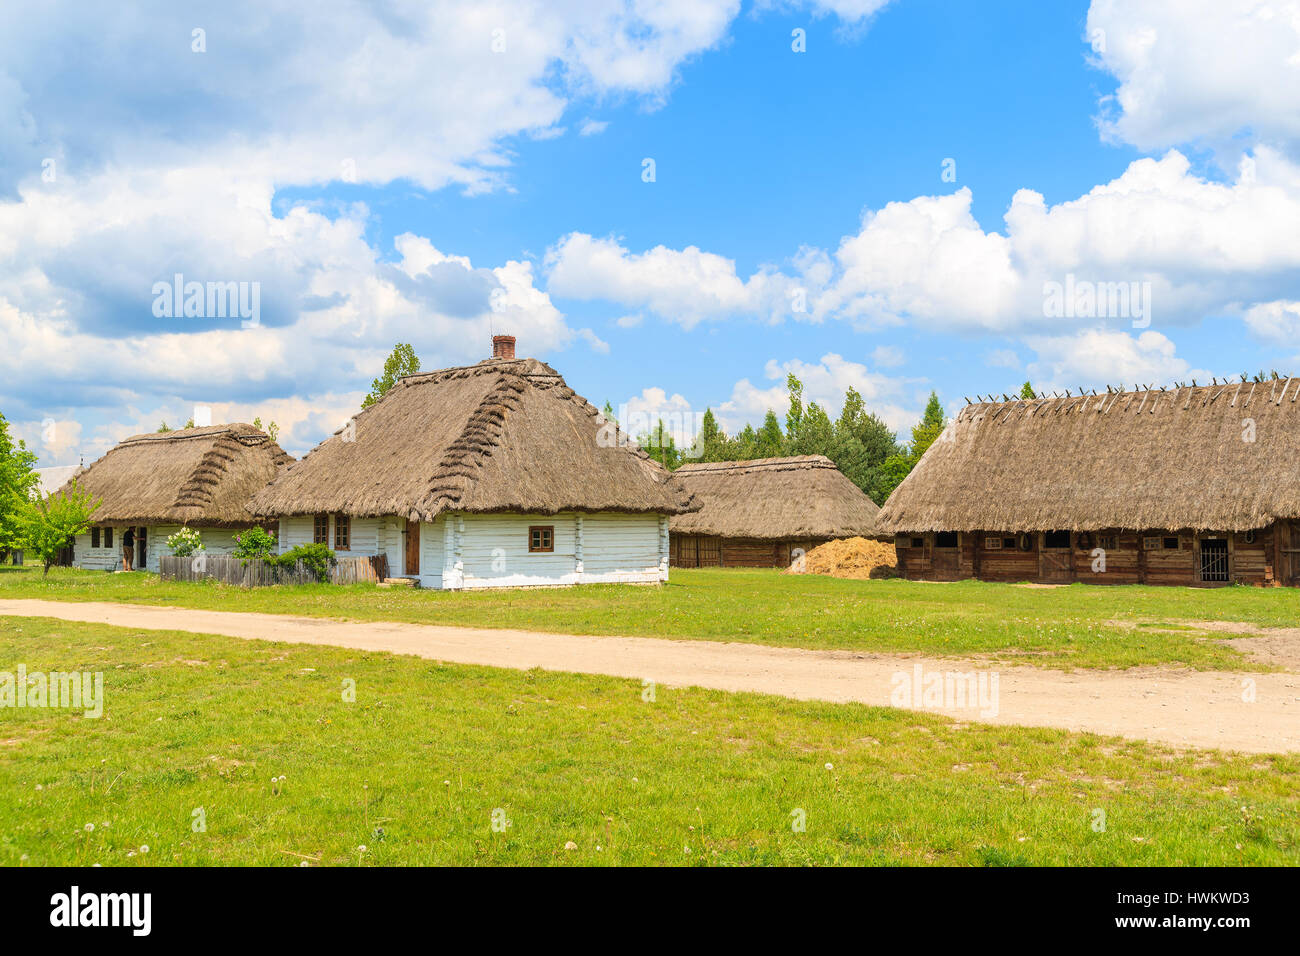 Rural road and old traditional houses with straw roof in Tokarnia village on sunny spring day, Poland Stock Photo